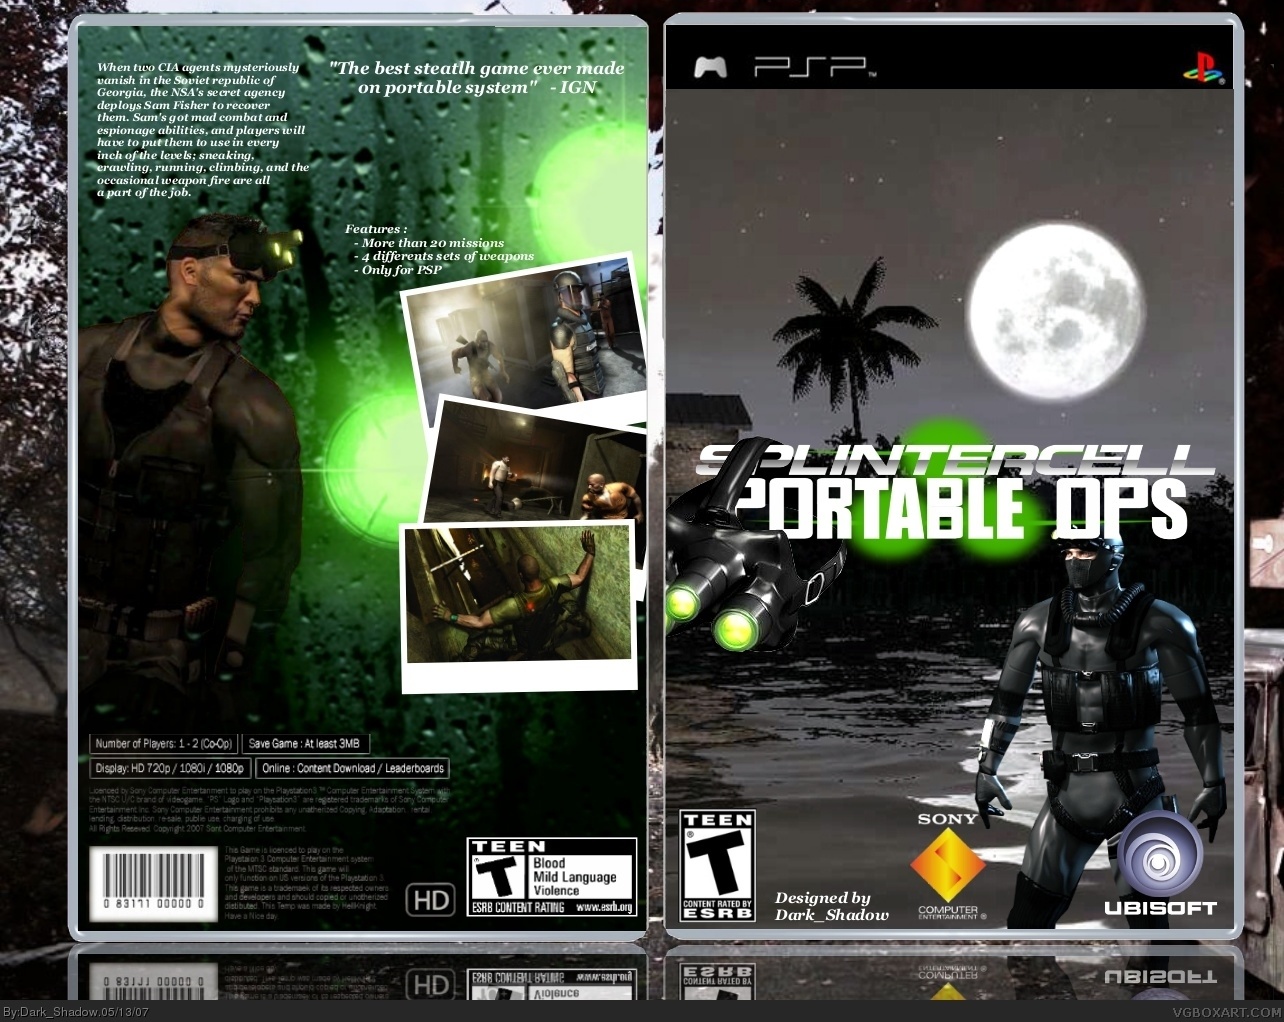 Tom Clancy's Splinter Cell: Portable OPS box cover